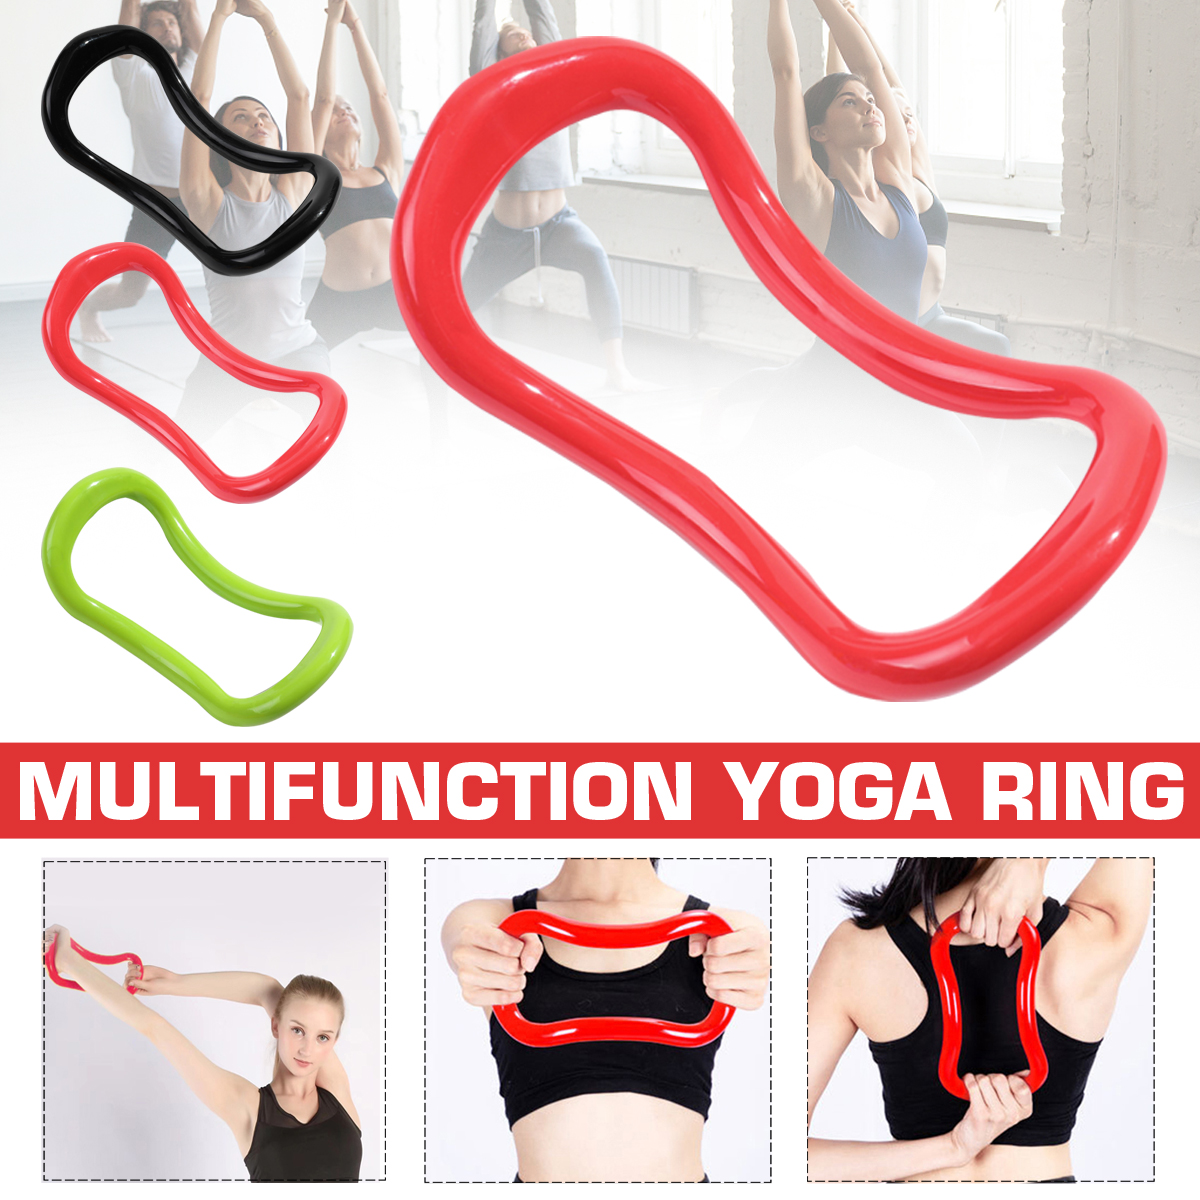 Yoga-Ring-Adjustable-Soft-Stretches-Chest-Thighs-Arms-Core--Pilates-Magic-Circle-Ring-Fitness-Traini-1700506-1